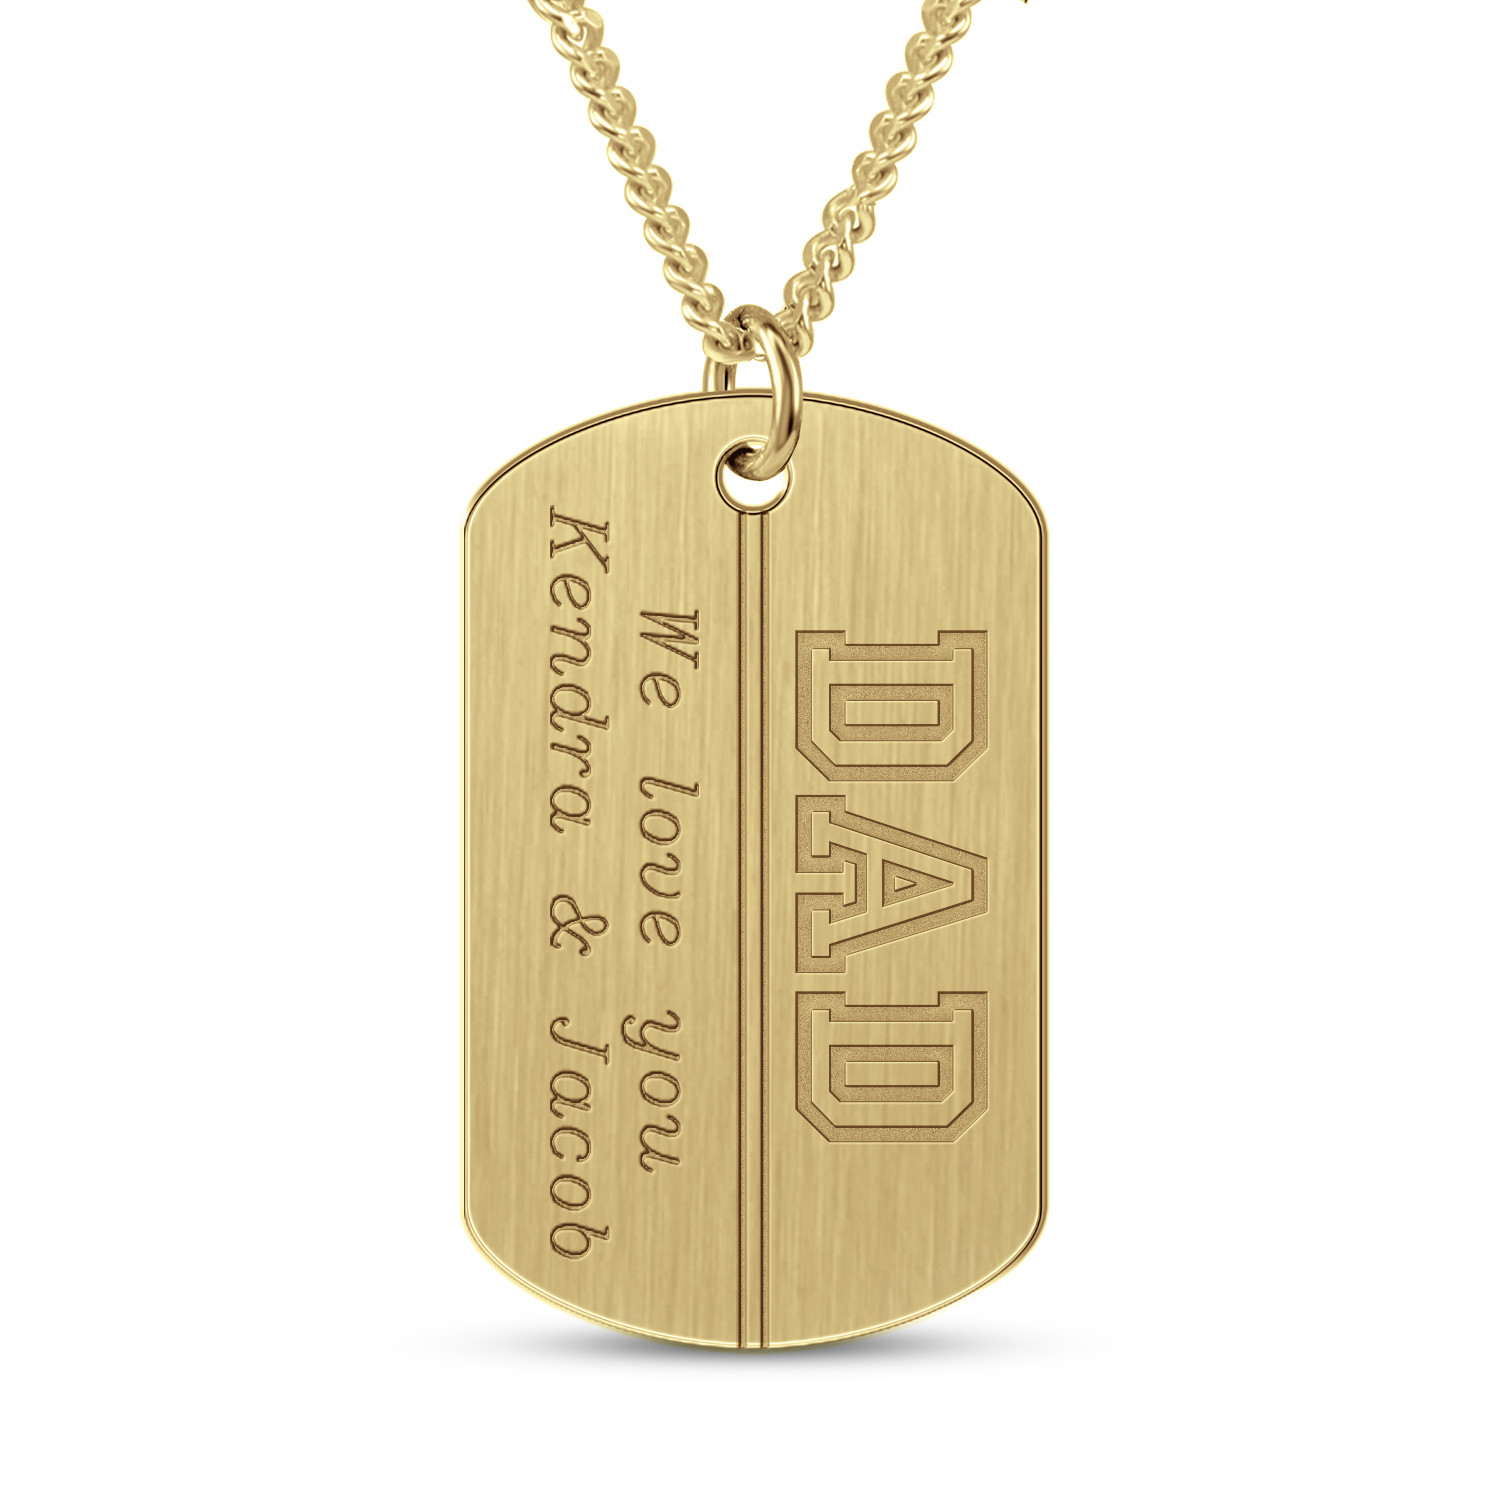 Double Dog Tag Pendant Necklace for Men Personalized Stainless Steel Male  Jewelry Free Engraving